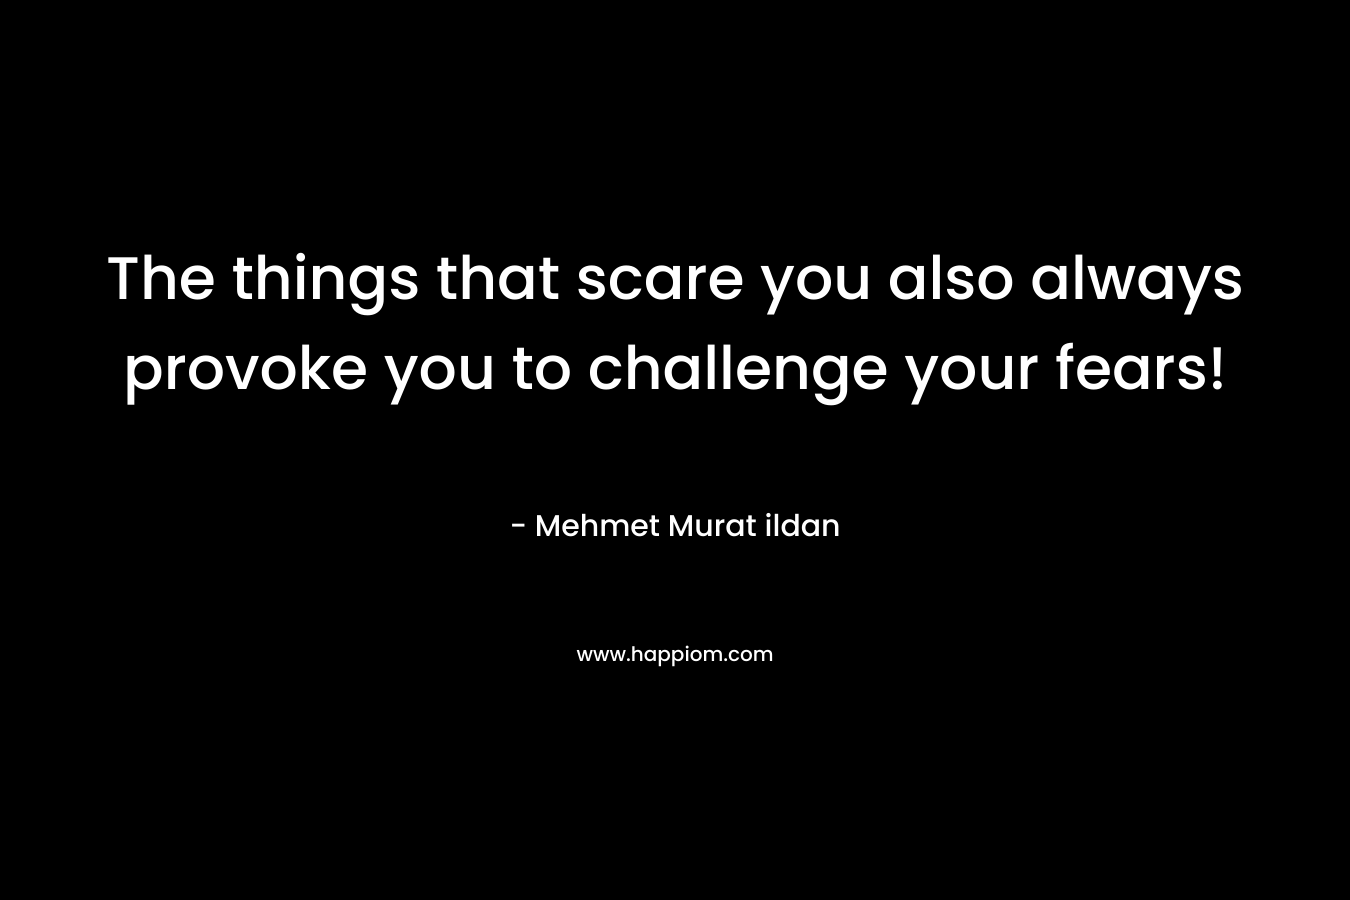 The things that scare you also always provoke you to challenge your fears!